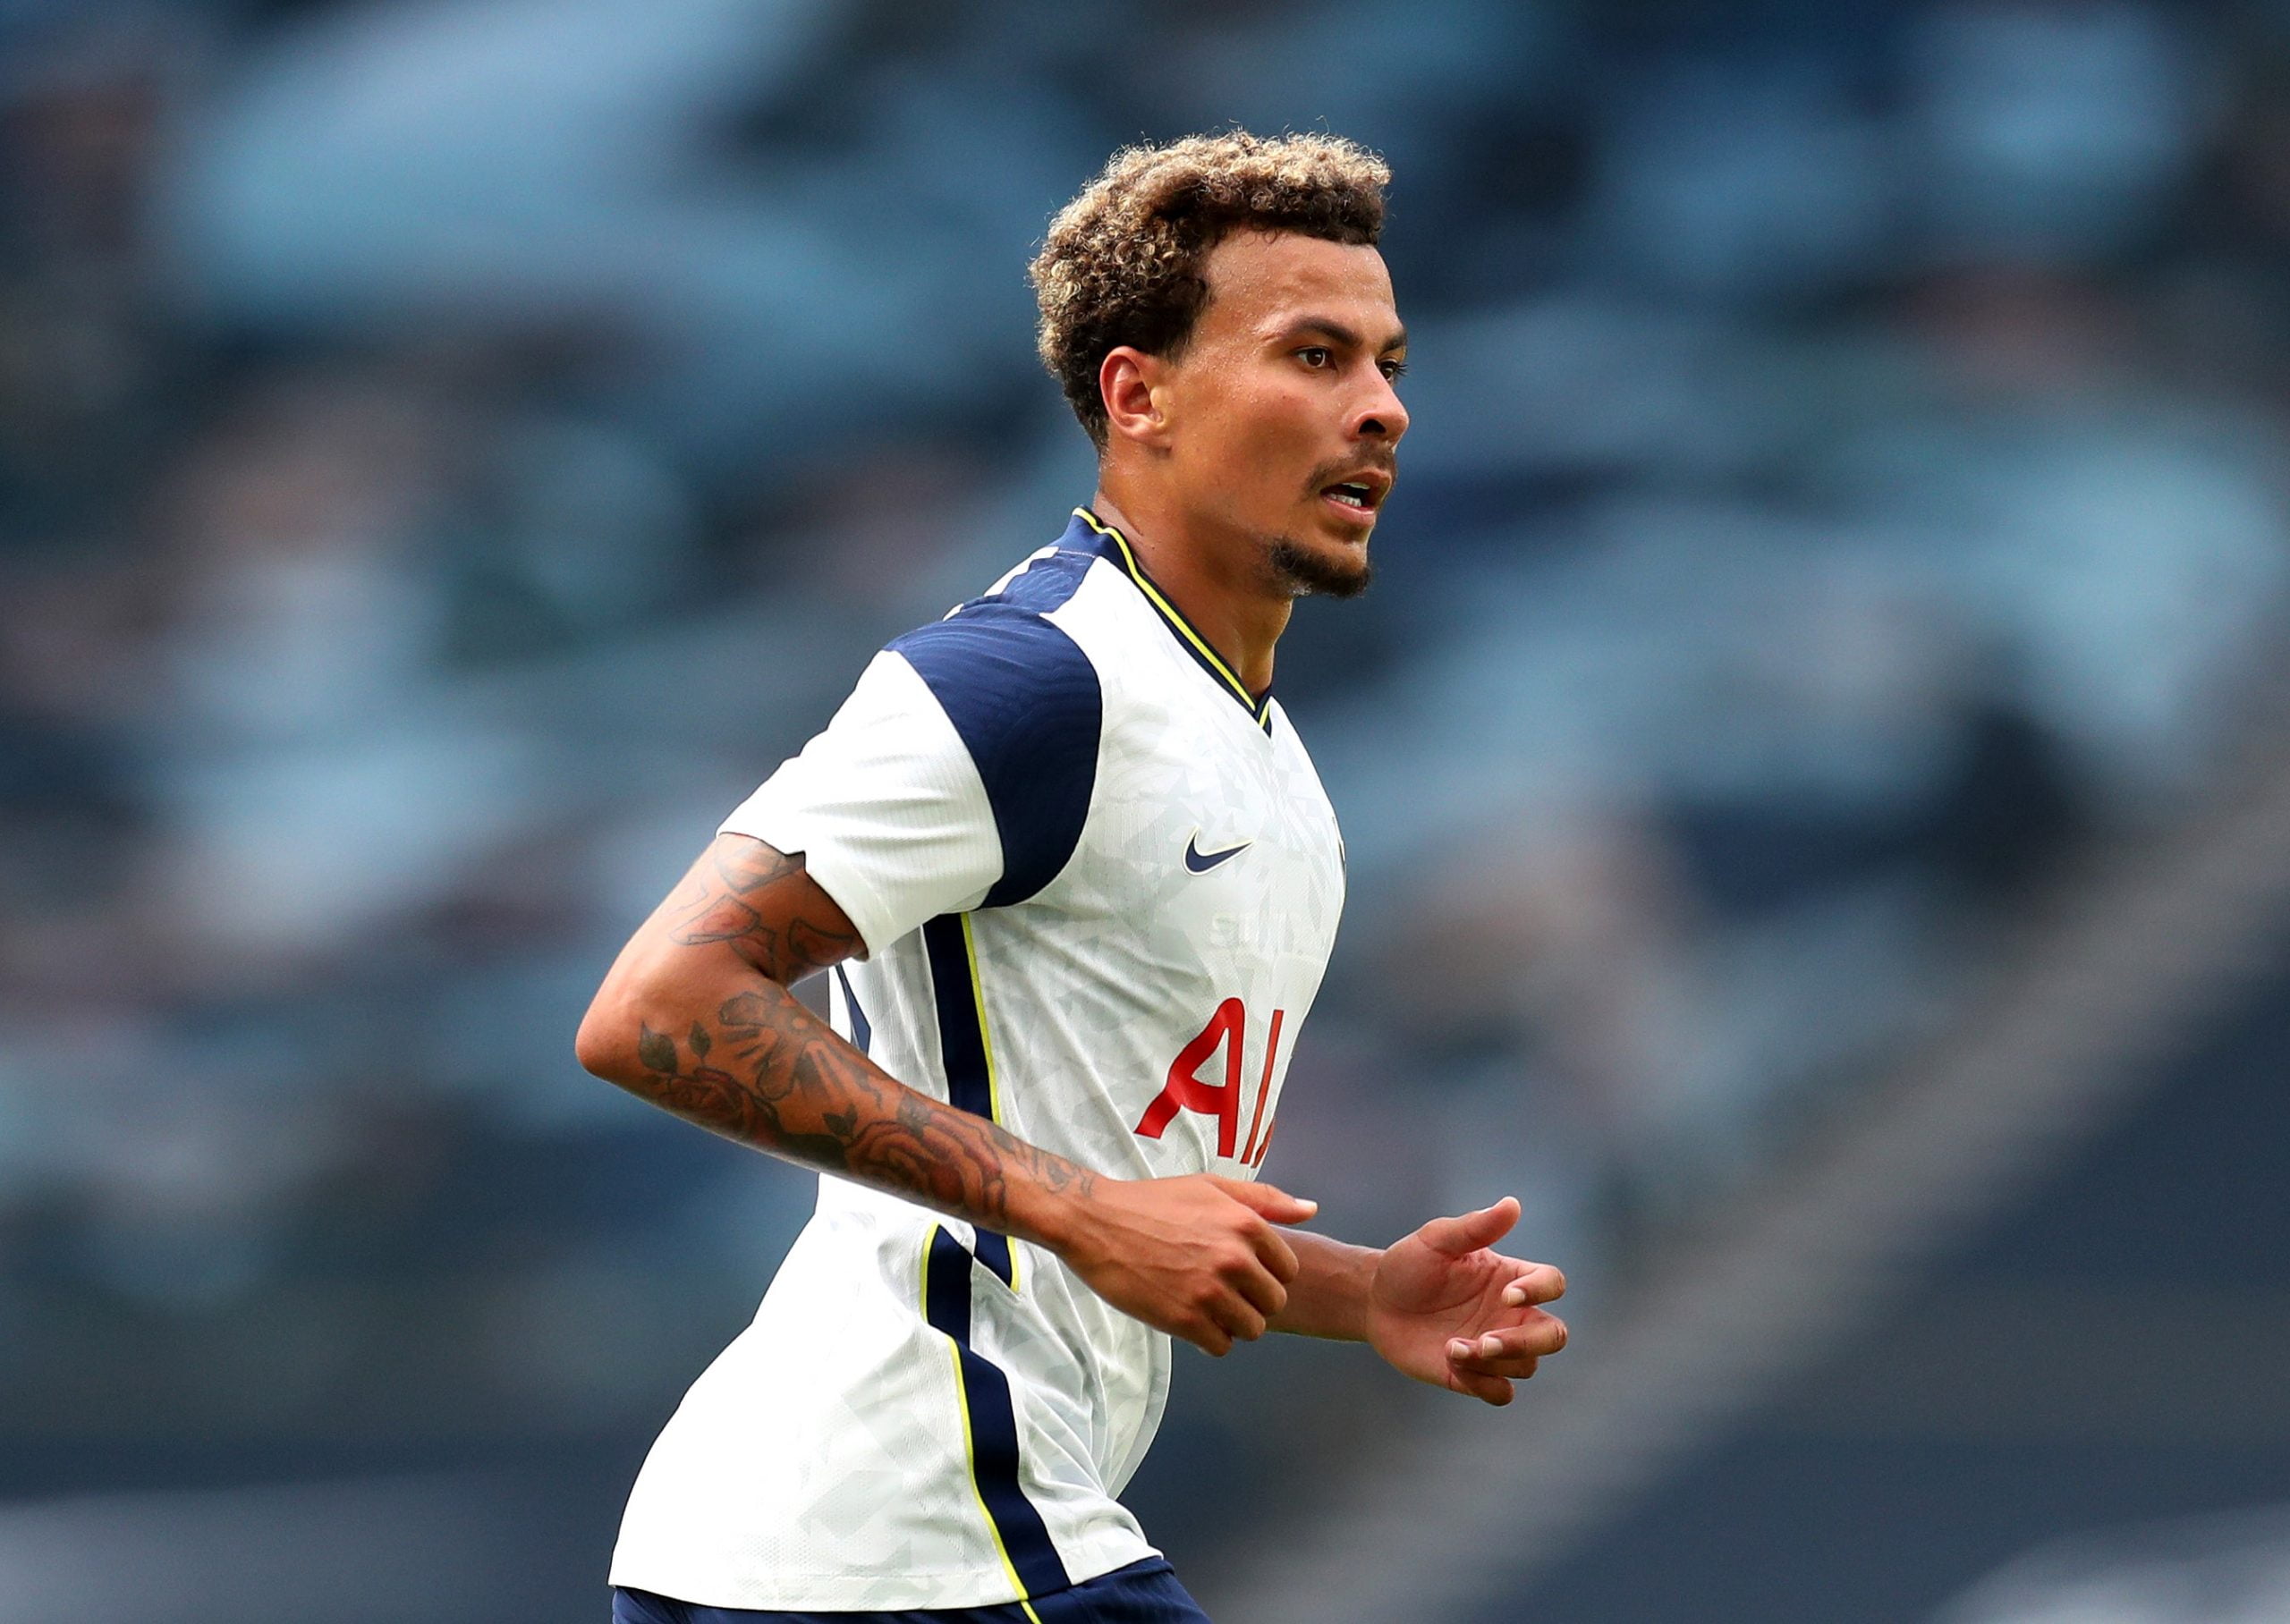 Newcastle United eyeing a loan move for Dele Alli who is in action in the picture